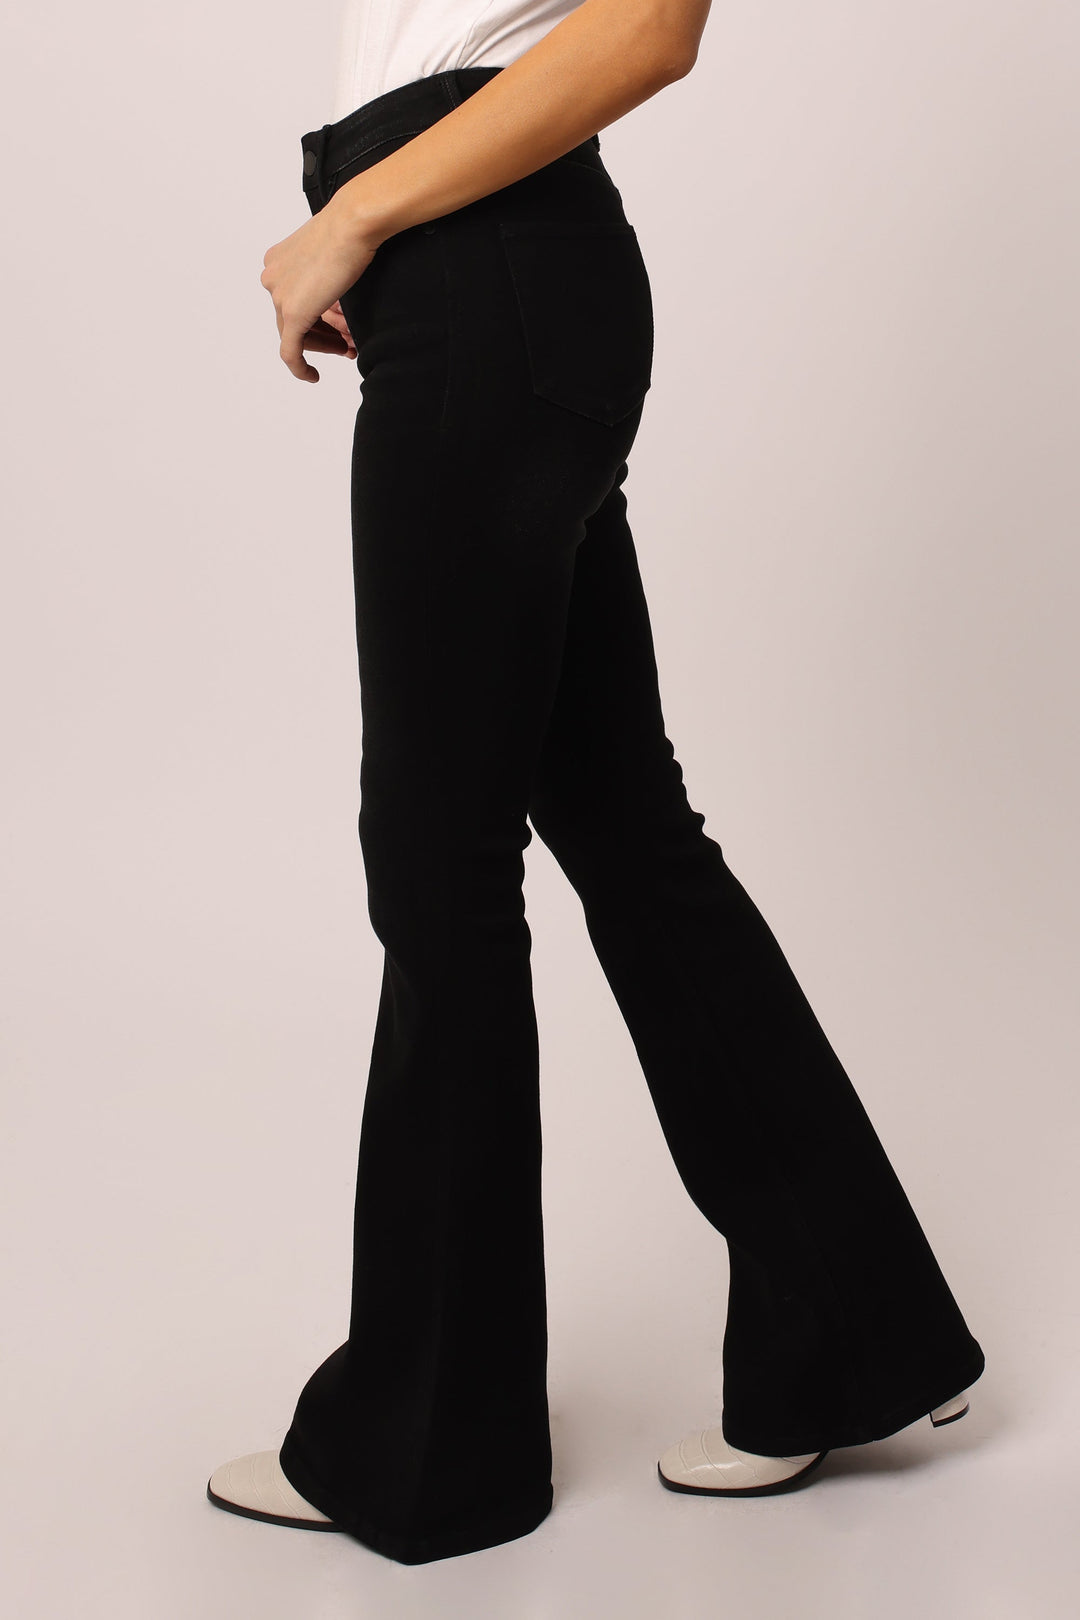 image of a female model wearing a LANEY HIGH RISE FLARE LEG JEANS BLACKWELL JEANS